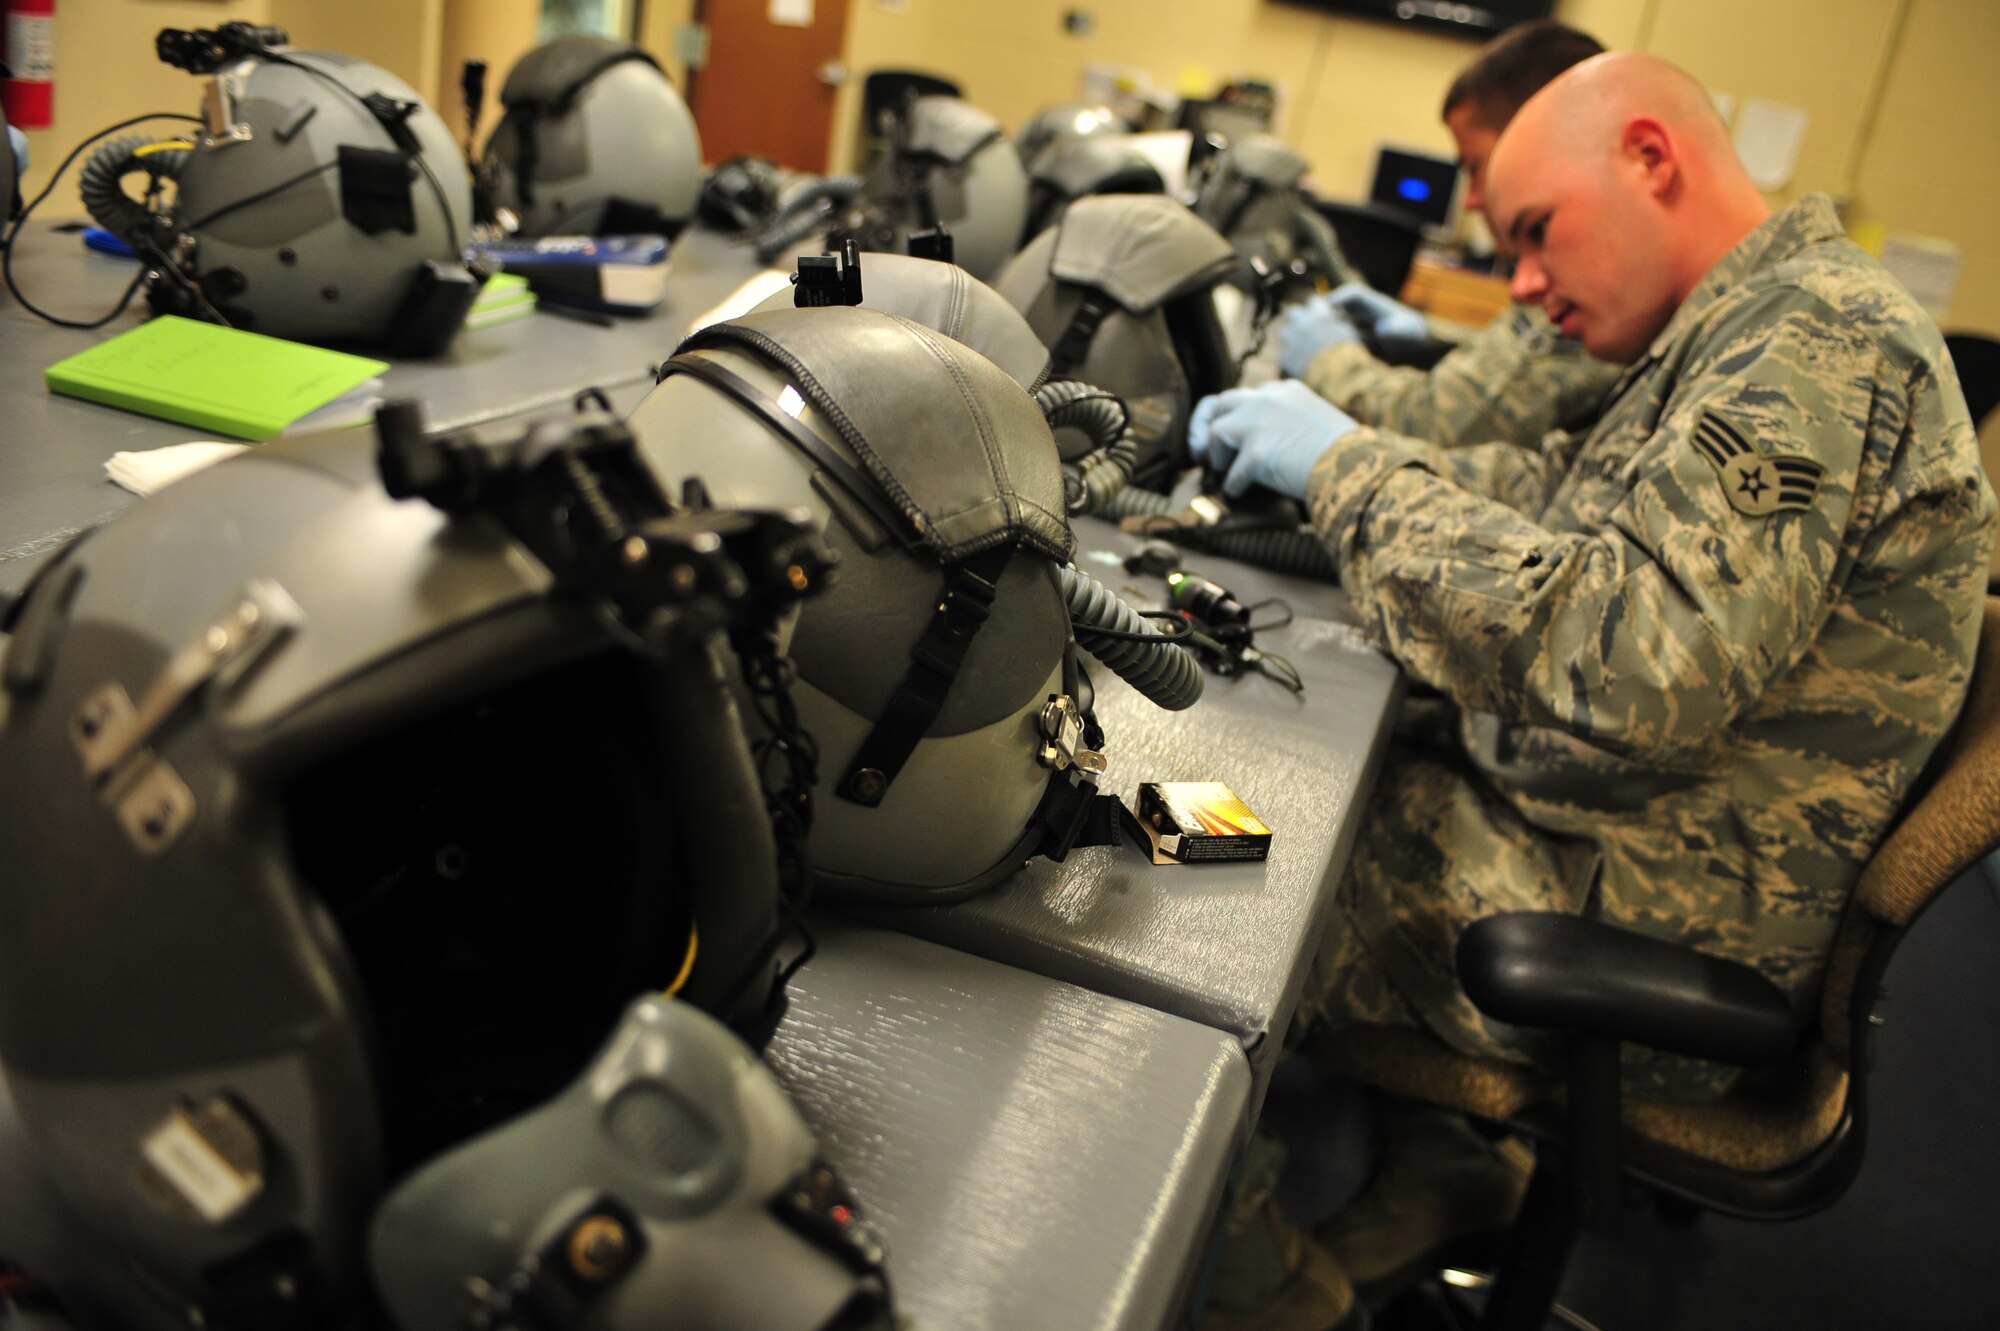 U.S. Air Force Senior Airman Nicholas Byars and Airman 1st Class Robert McClung, 27th Special Operations Support Squadron aircrew flight equipment specialists, inspect and adjust components on helmets and oxygen masks at Cannon Air Force Base, N.M., July 3, 2012. Aircrew flight equipment specialists inspect, maintain and adjust life support and survival gear for flight crew members assigned to Cannon. (U.S. Air Force photo by Airman 1st Class Eboni Reece)
